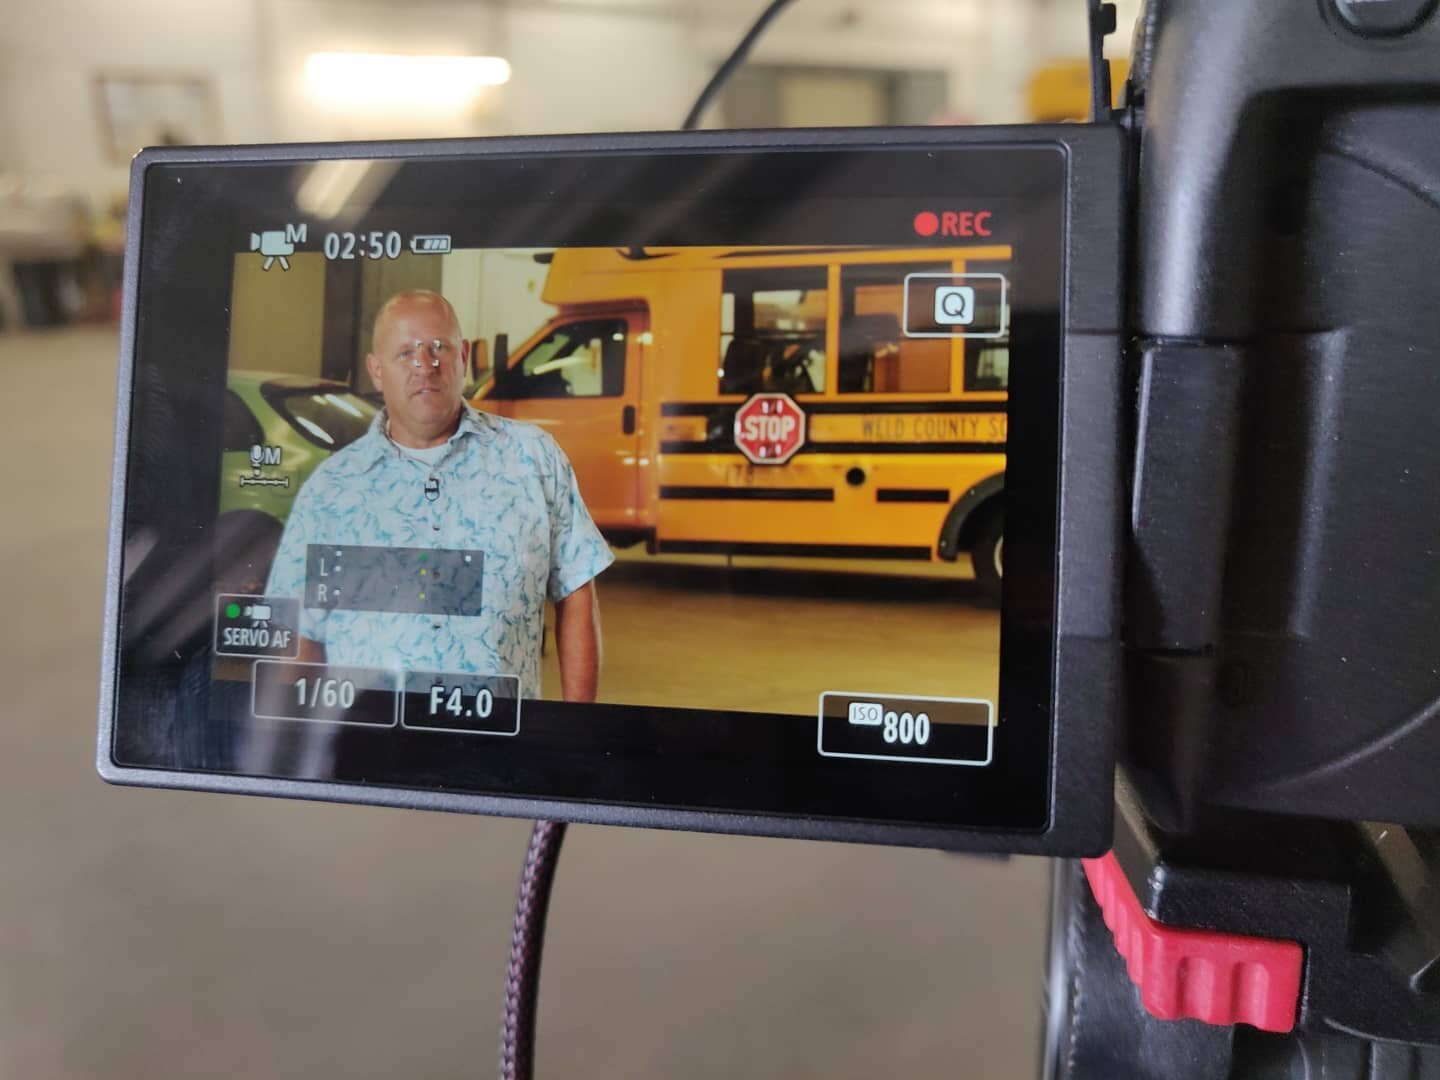 This week we've been busy filming all over town! We're working on a project for District 6's Internship Program. In this shot were filming at the transportation department.